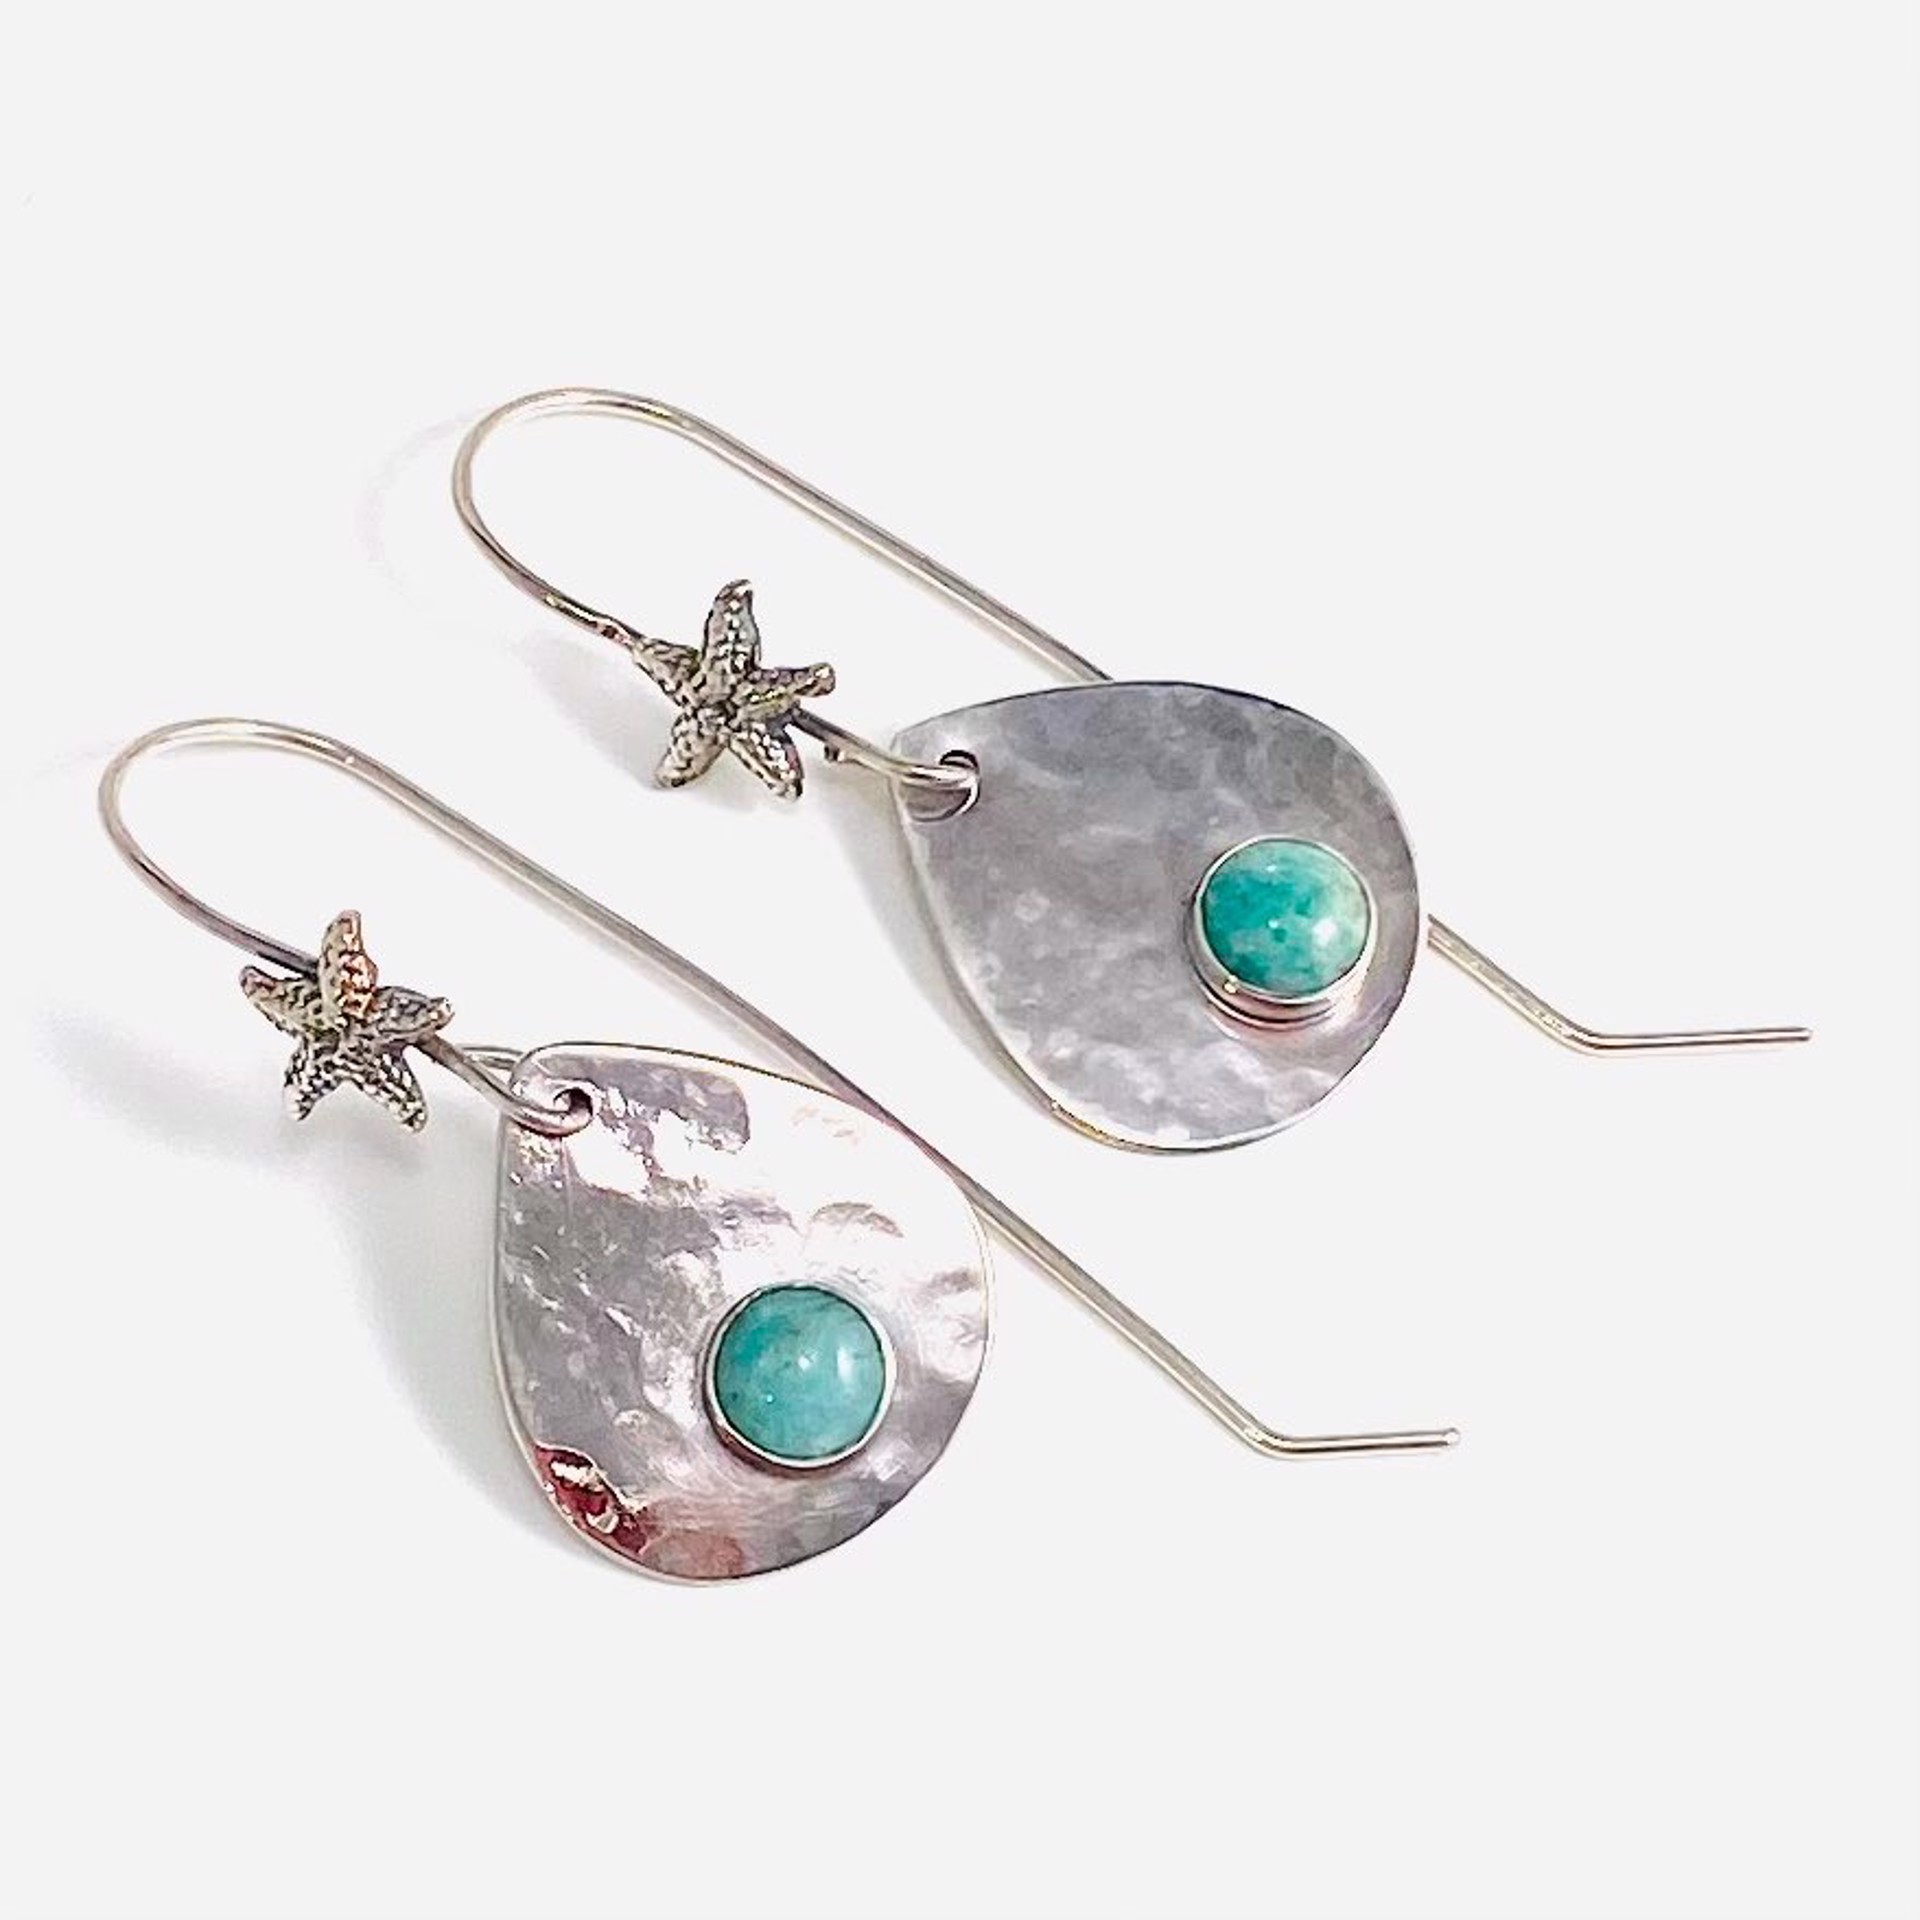 Small Hammered Teardrop Brazilian Amazonite Cabochon Starfish Accent Earrings AB22-59 by Anne Bivens